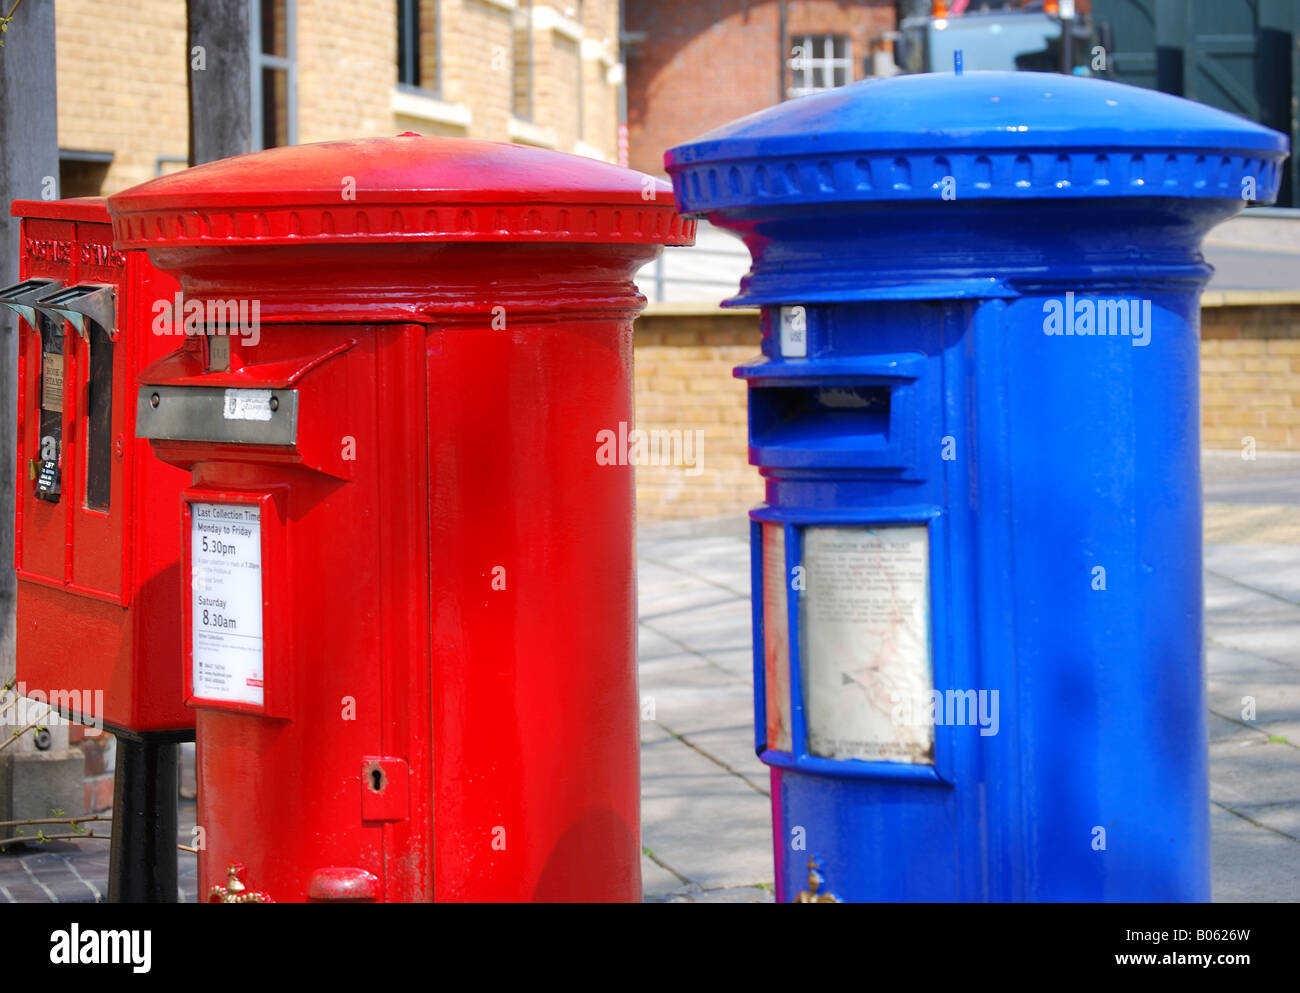 Red and blue airmail post boxes, High Street, Windsor, Berkshire, England, United Kingdom Stock Photo